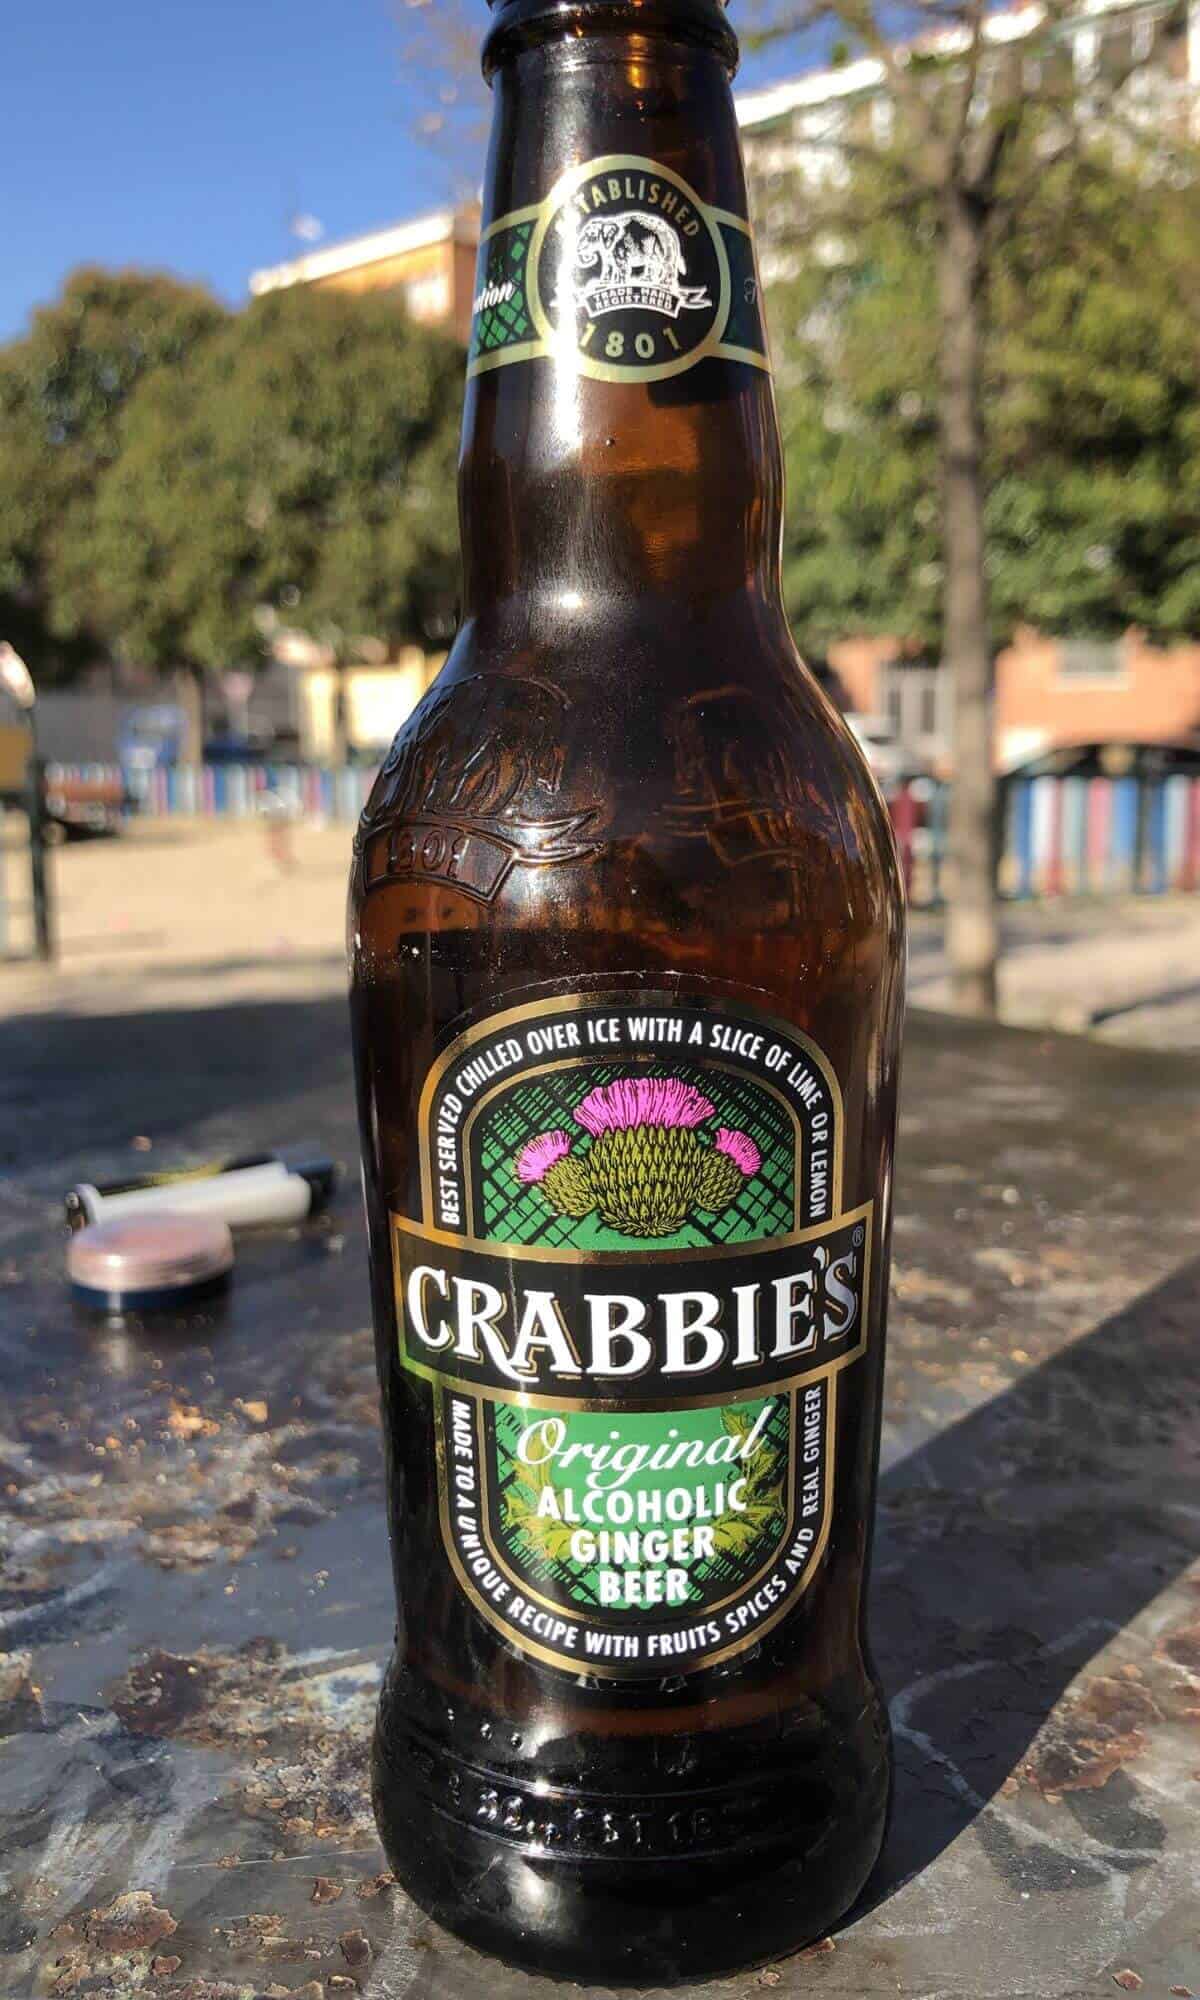 A bottle of Crabbie's Original Alcohol Ginger Beer on an outdoor table.